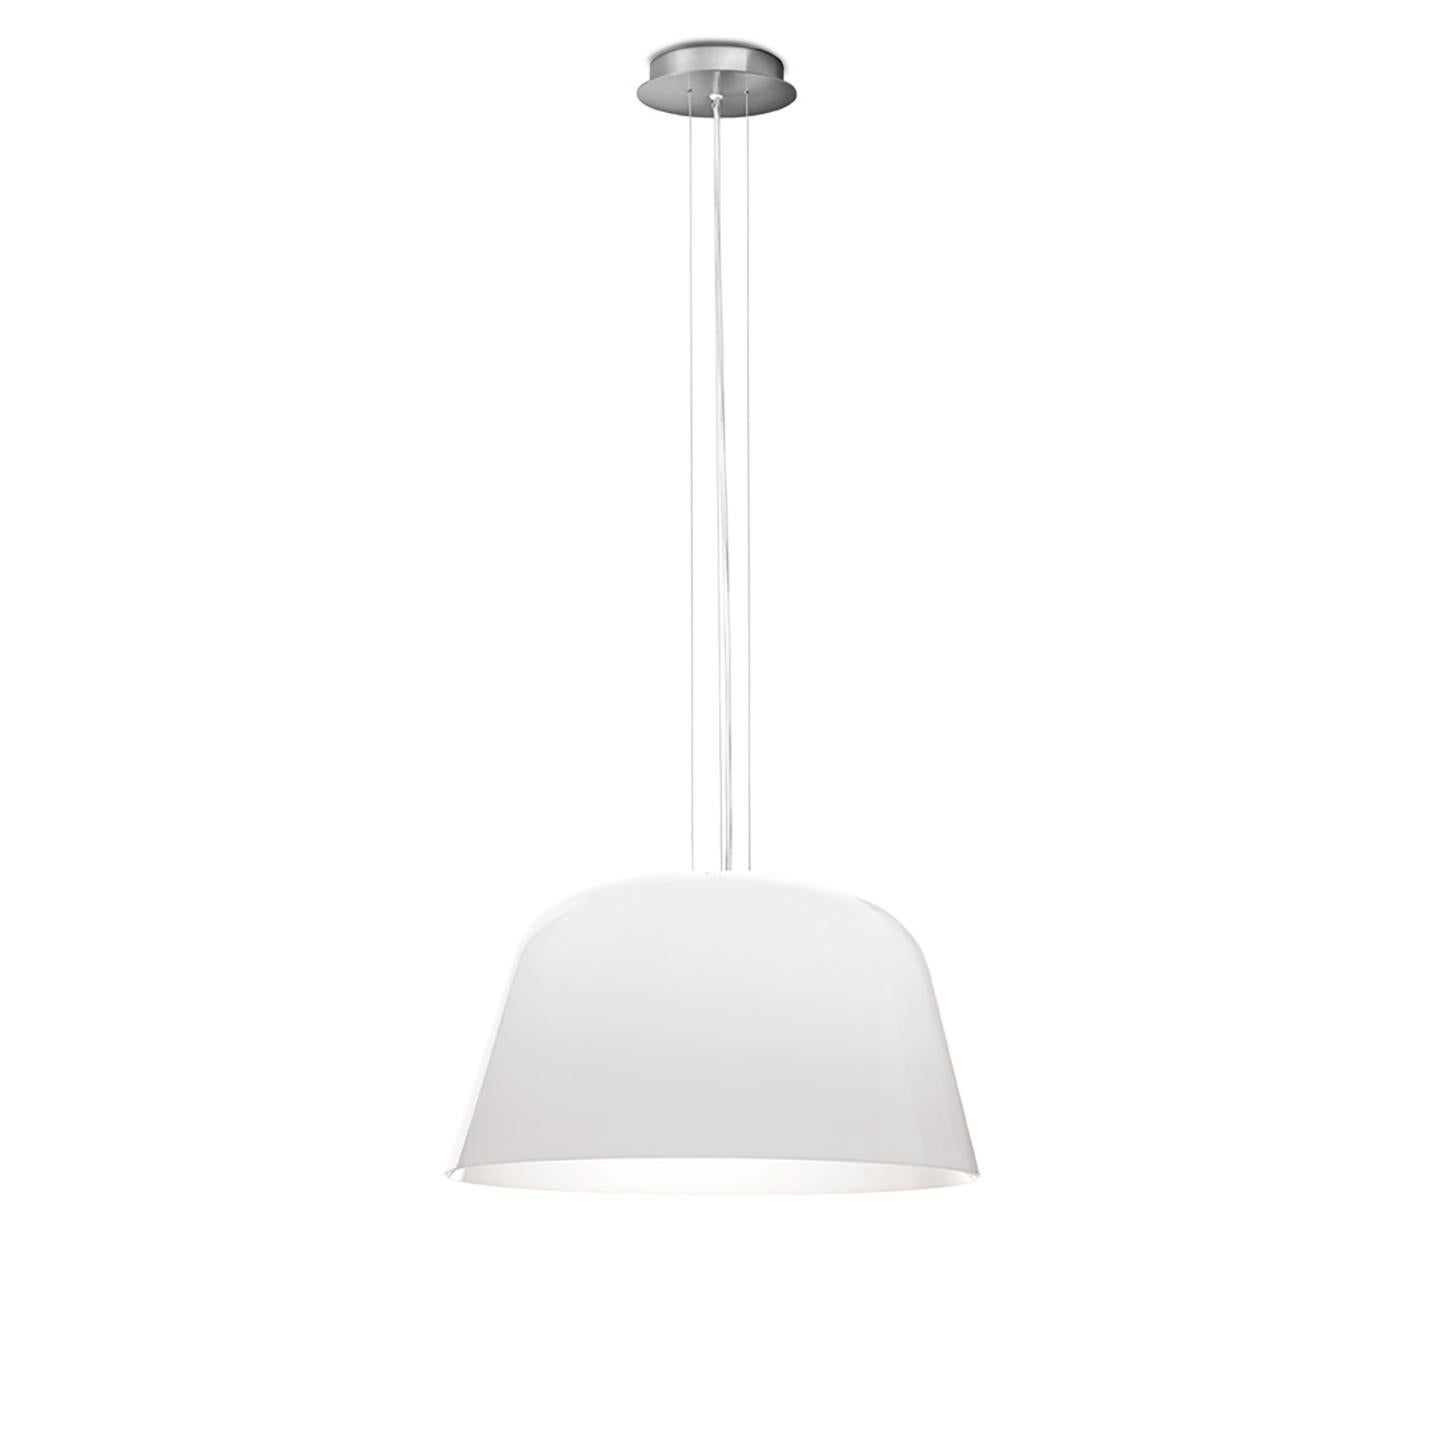 Leucos Ayers S 38 Pendant Light in Glossy White and Satin Nickel by Marco Piva For Sale